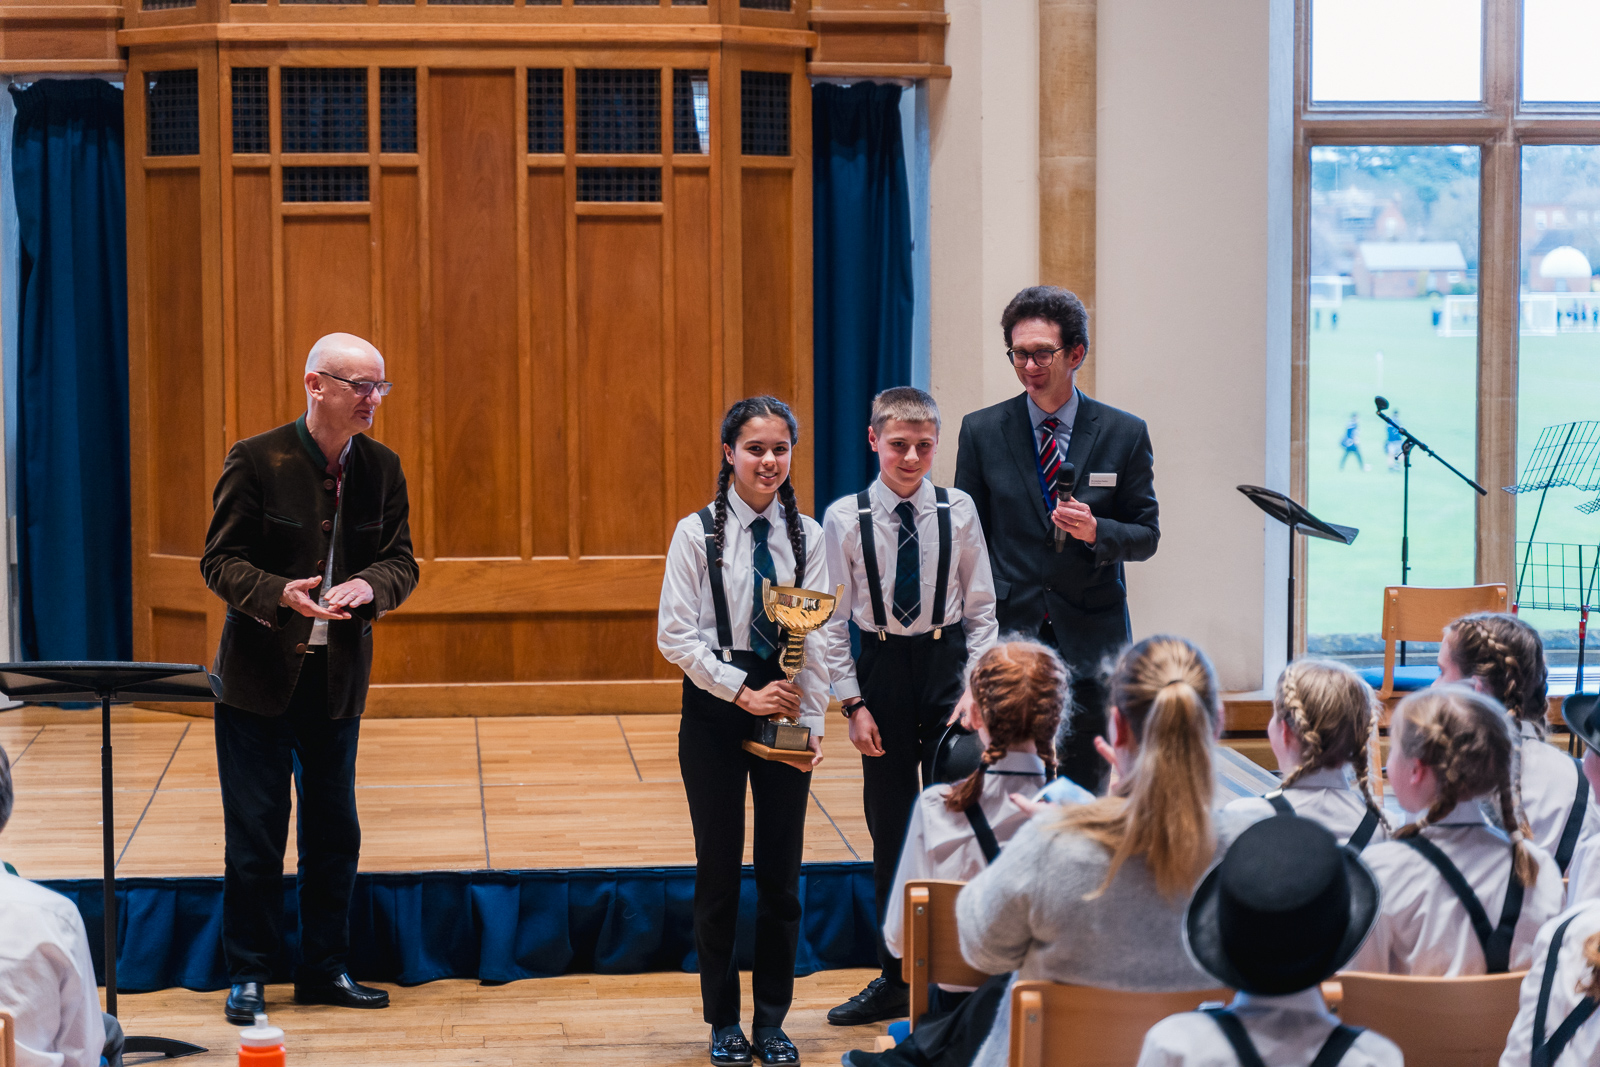 Girl and boy choir captains receive a trophy from Bob Chilcott at the Bedford Choral competition